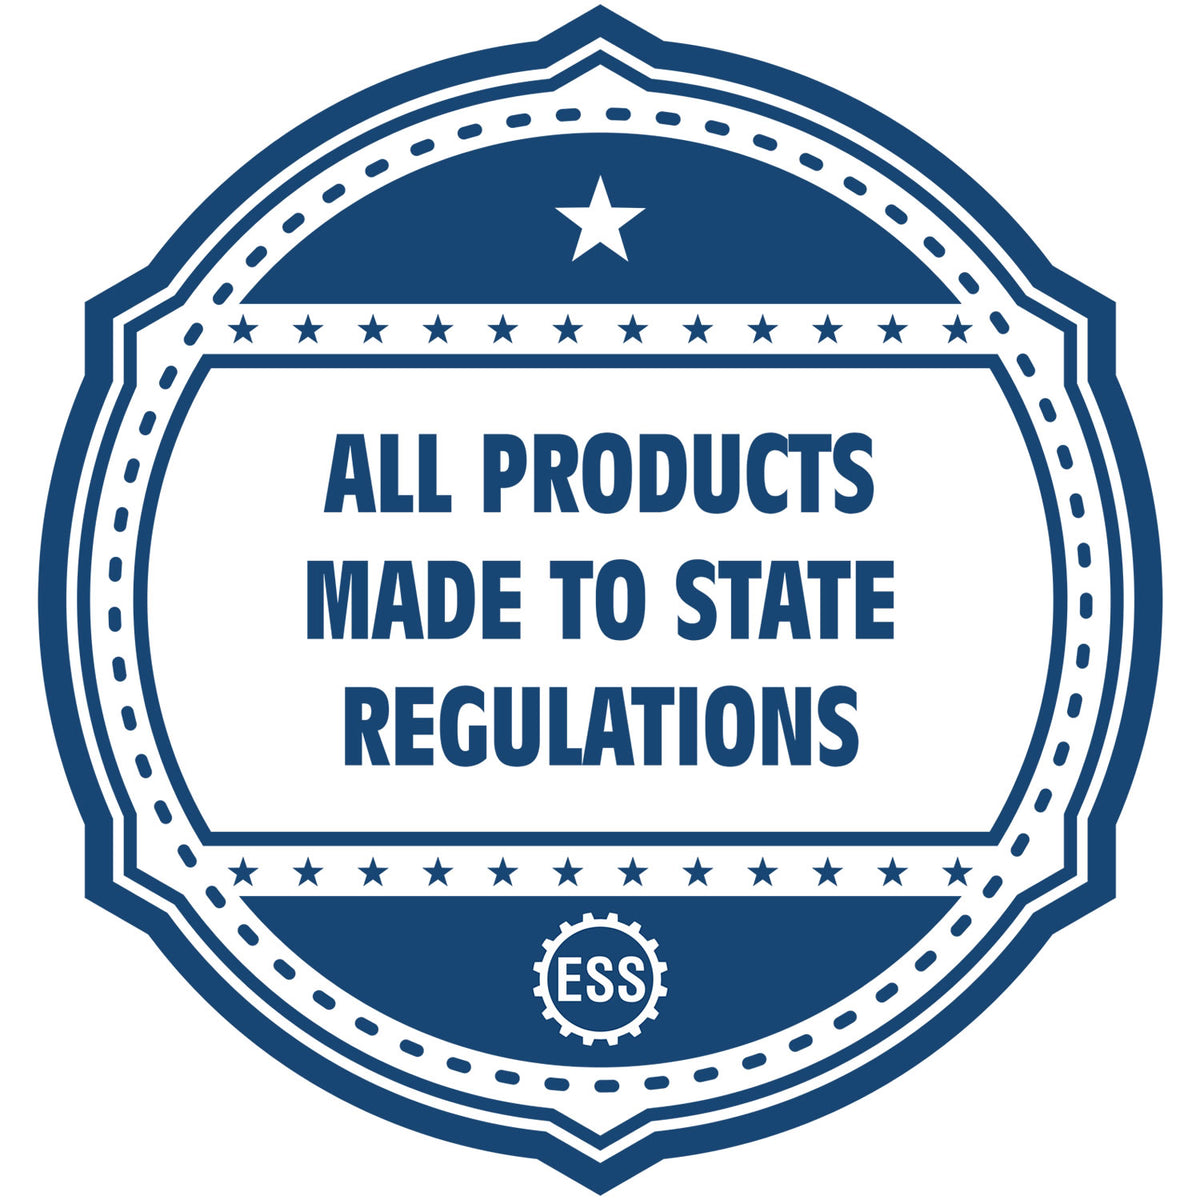 An icon or badge element for the Wooden Handle Nevada State Seal Notary Public Stamp showing that this product is made in compliance with state regulations.